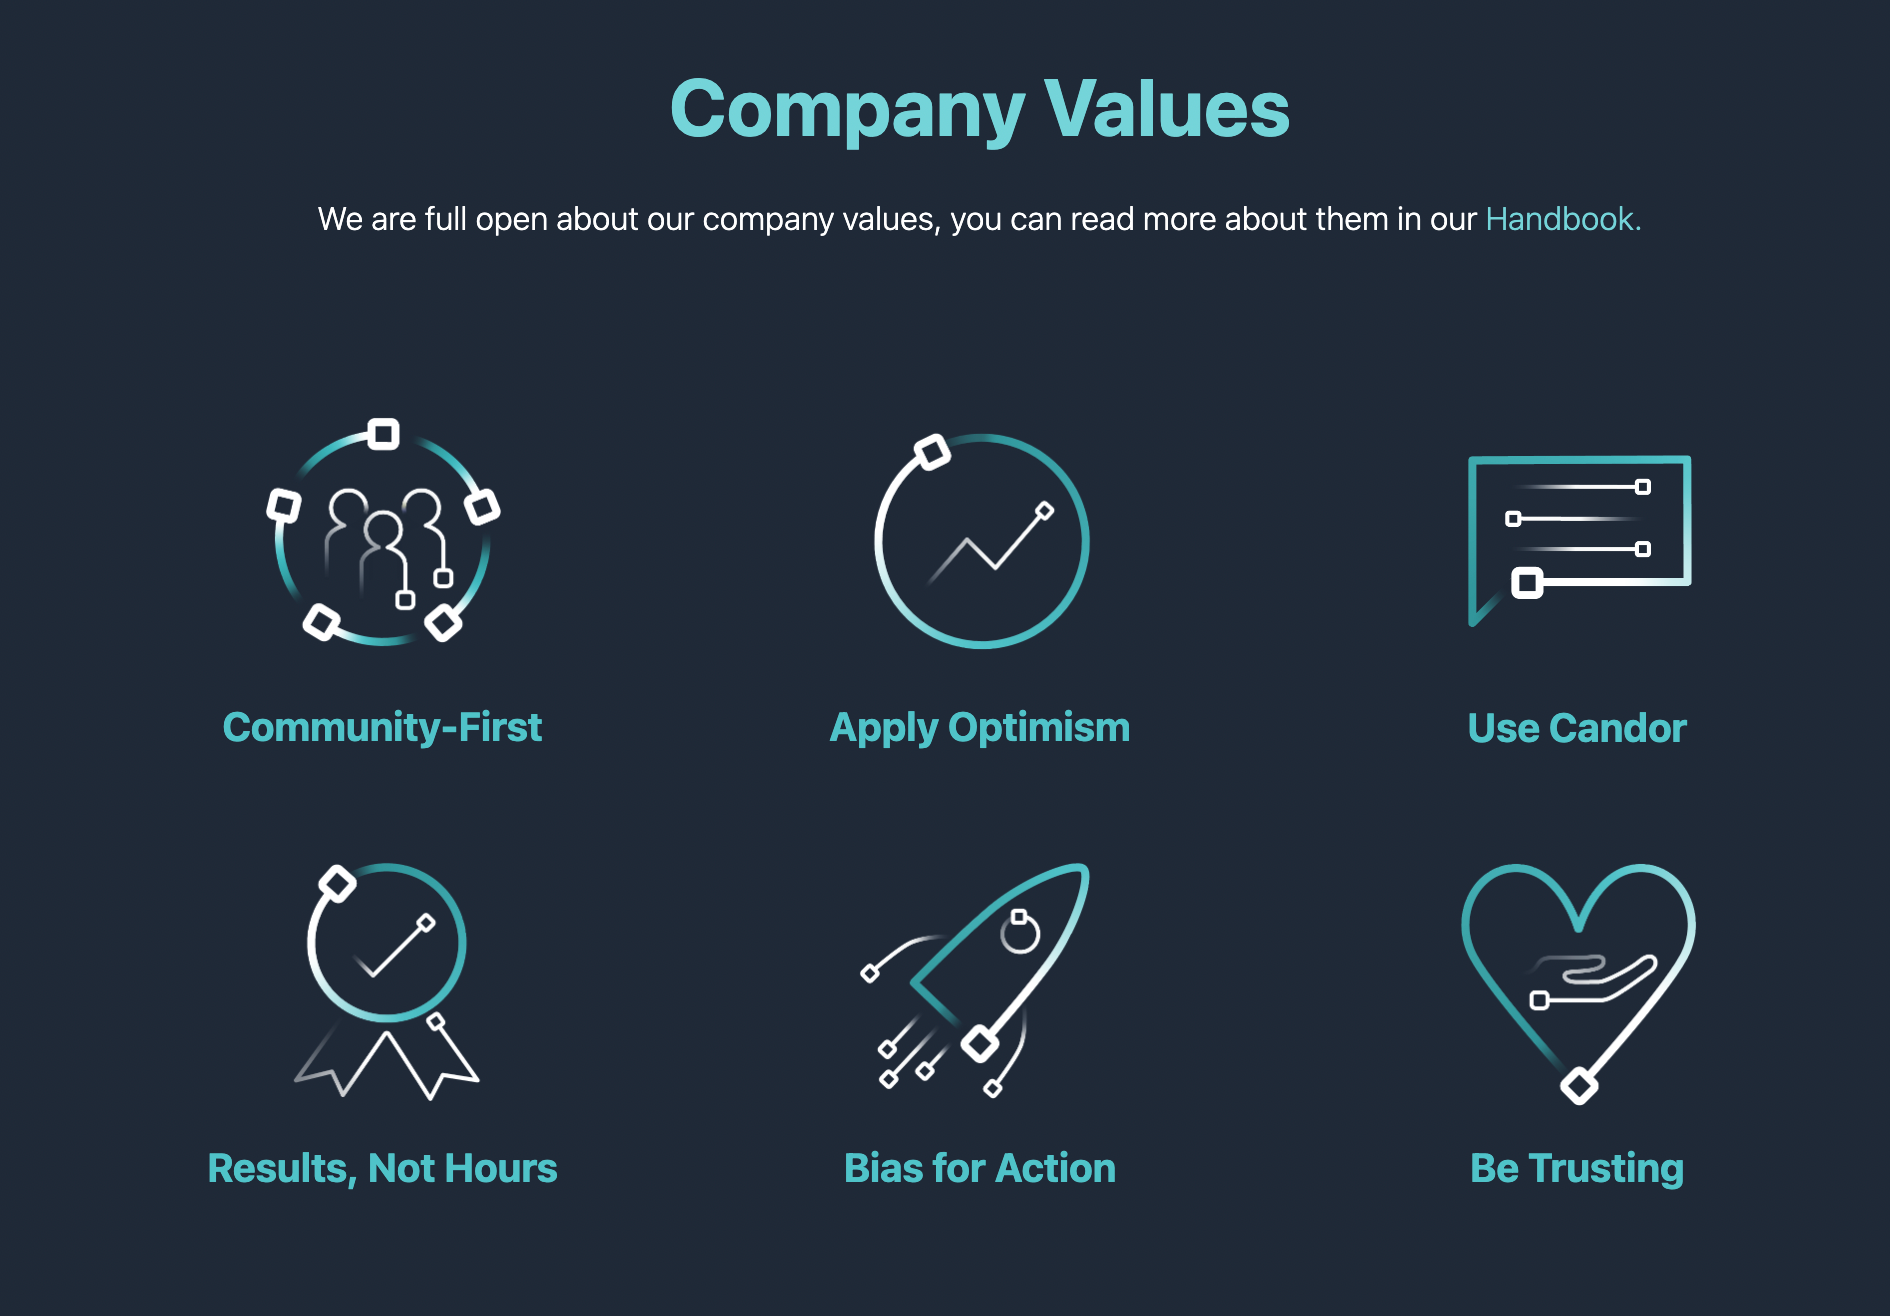 An example showing how Pictograms are used in the 'Company Values' section of the FlowForge website